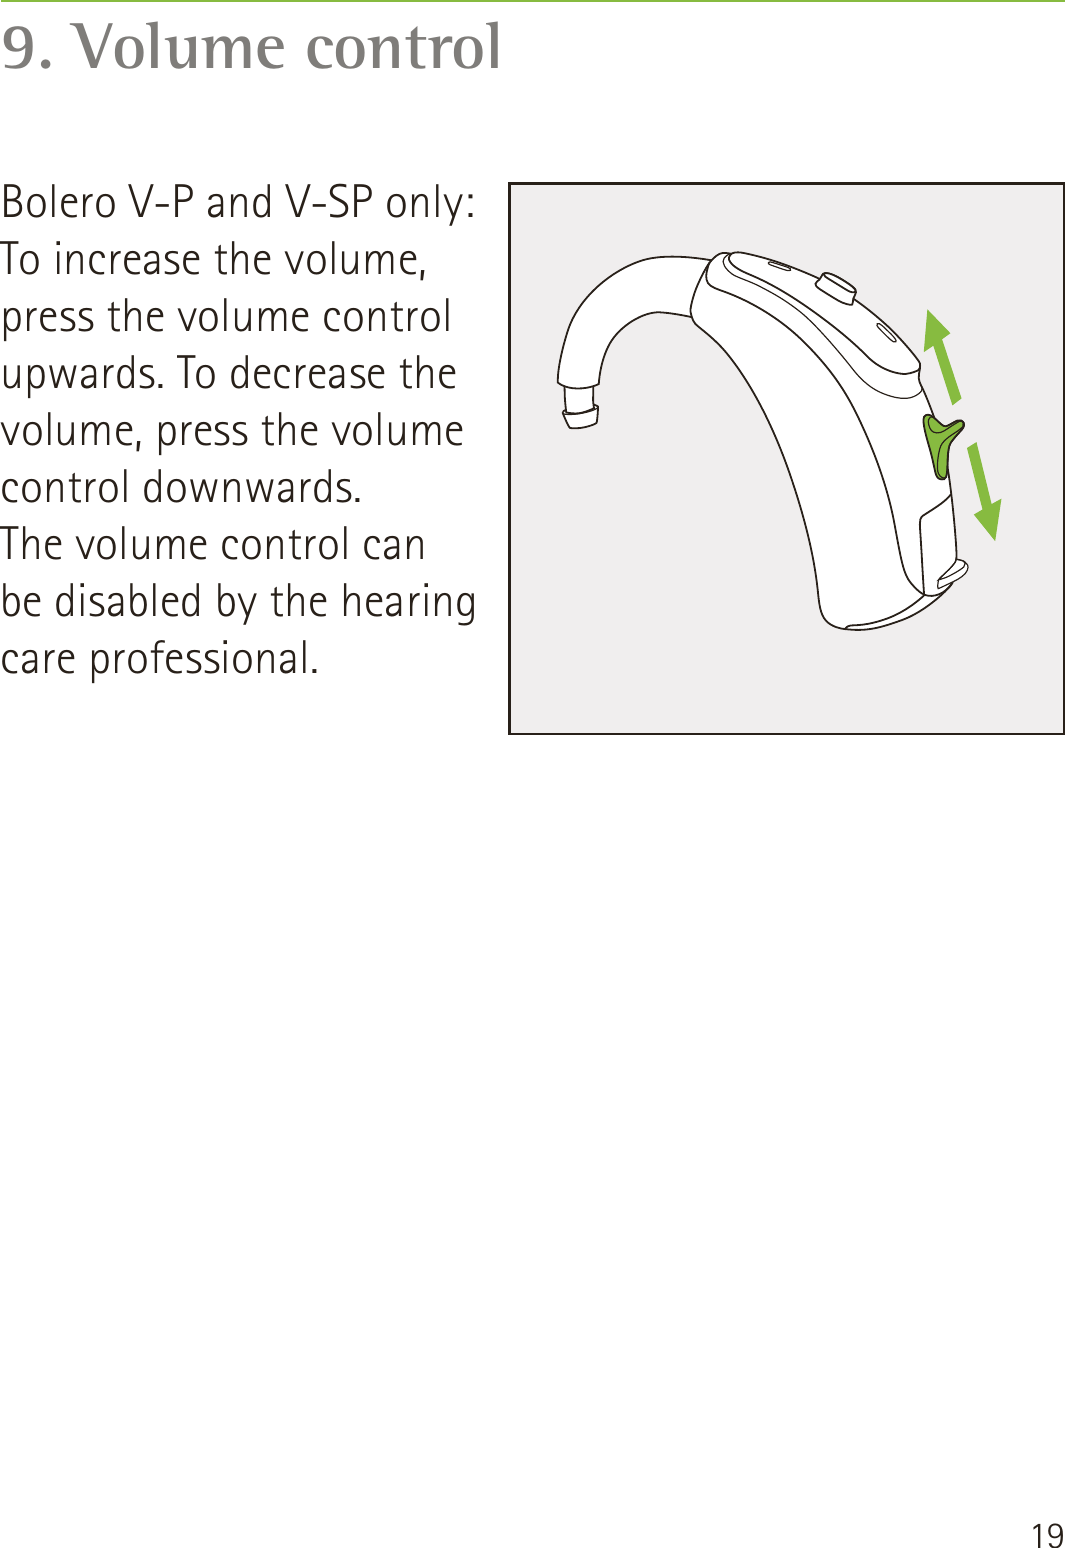 199. Volume controlBolero V-P and V-SP only: To increase the volume, press the volume control upwards. To decrease the volume, press the volume control downwards. The volume control can  be disabled by the hearing care professional.